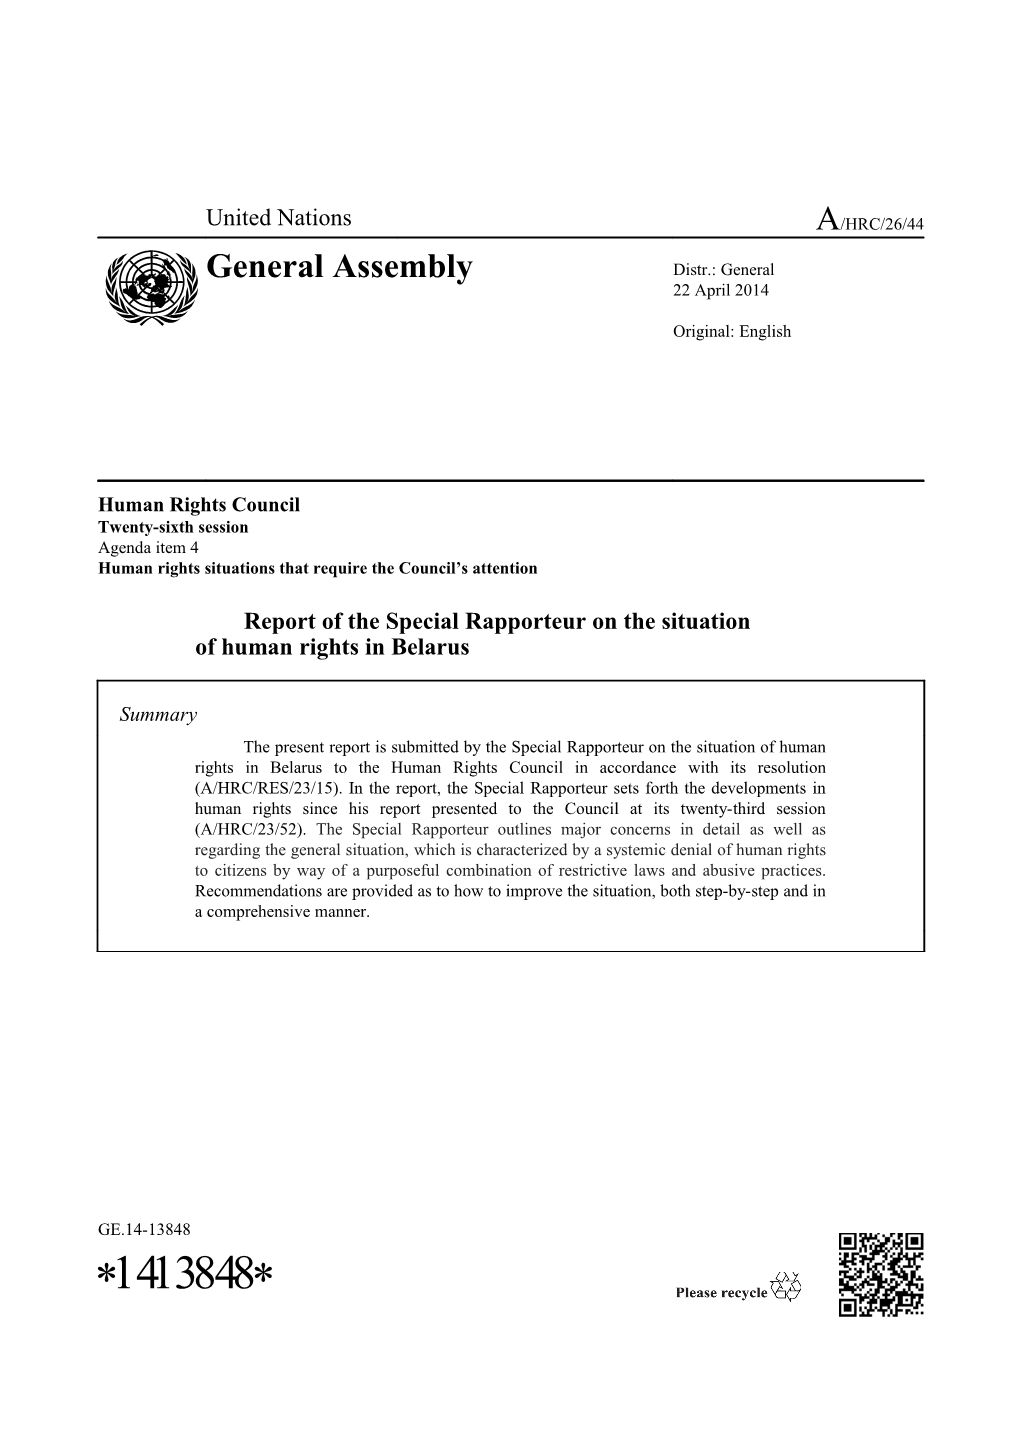 Report of the Special Rapporteur on the Situation of Human Rights in Belarus in English